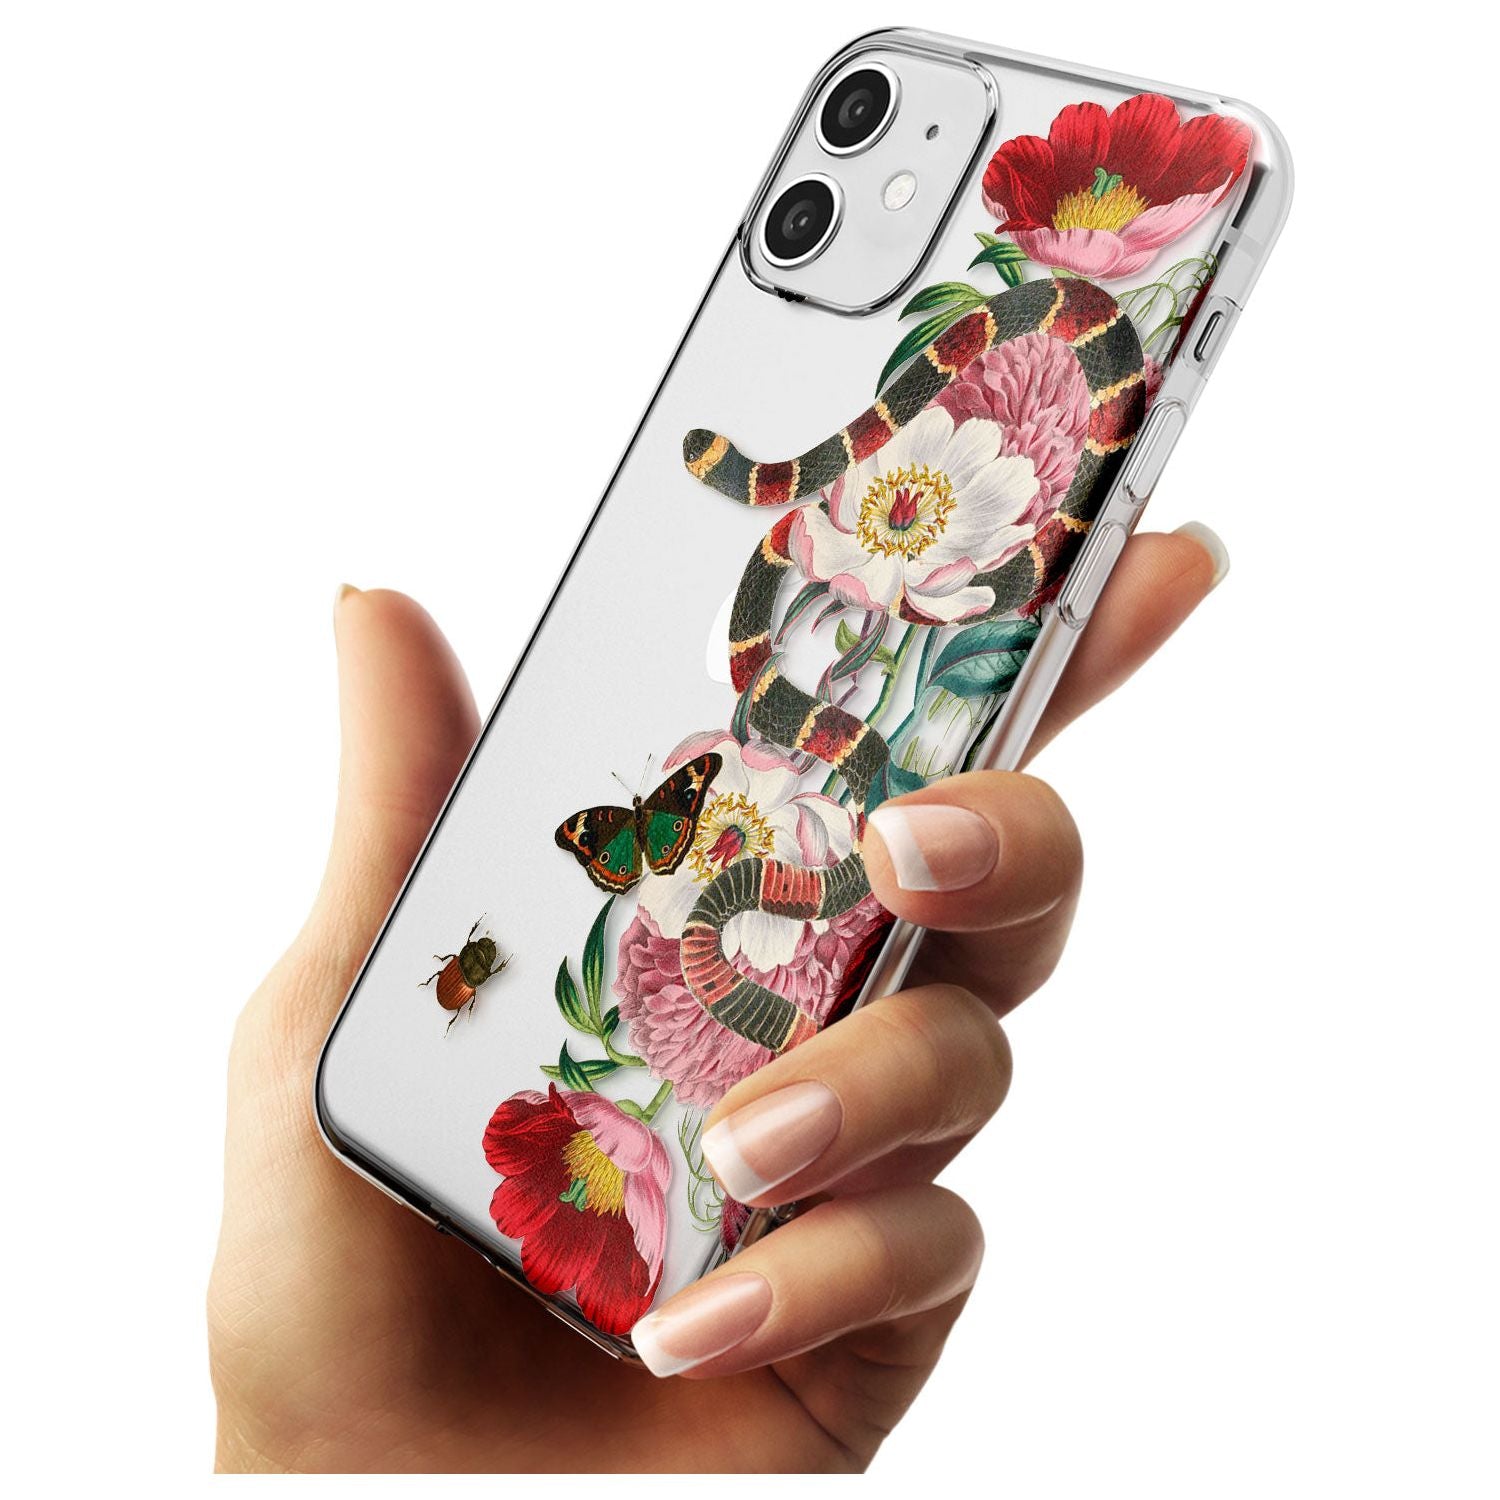 Floral Snake Black Impact Phone Case for iPhone 11